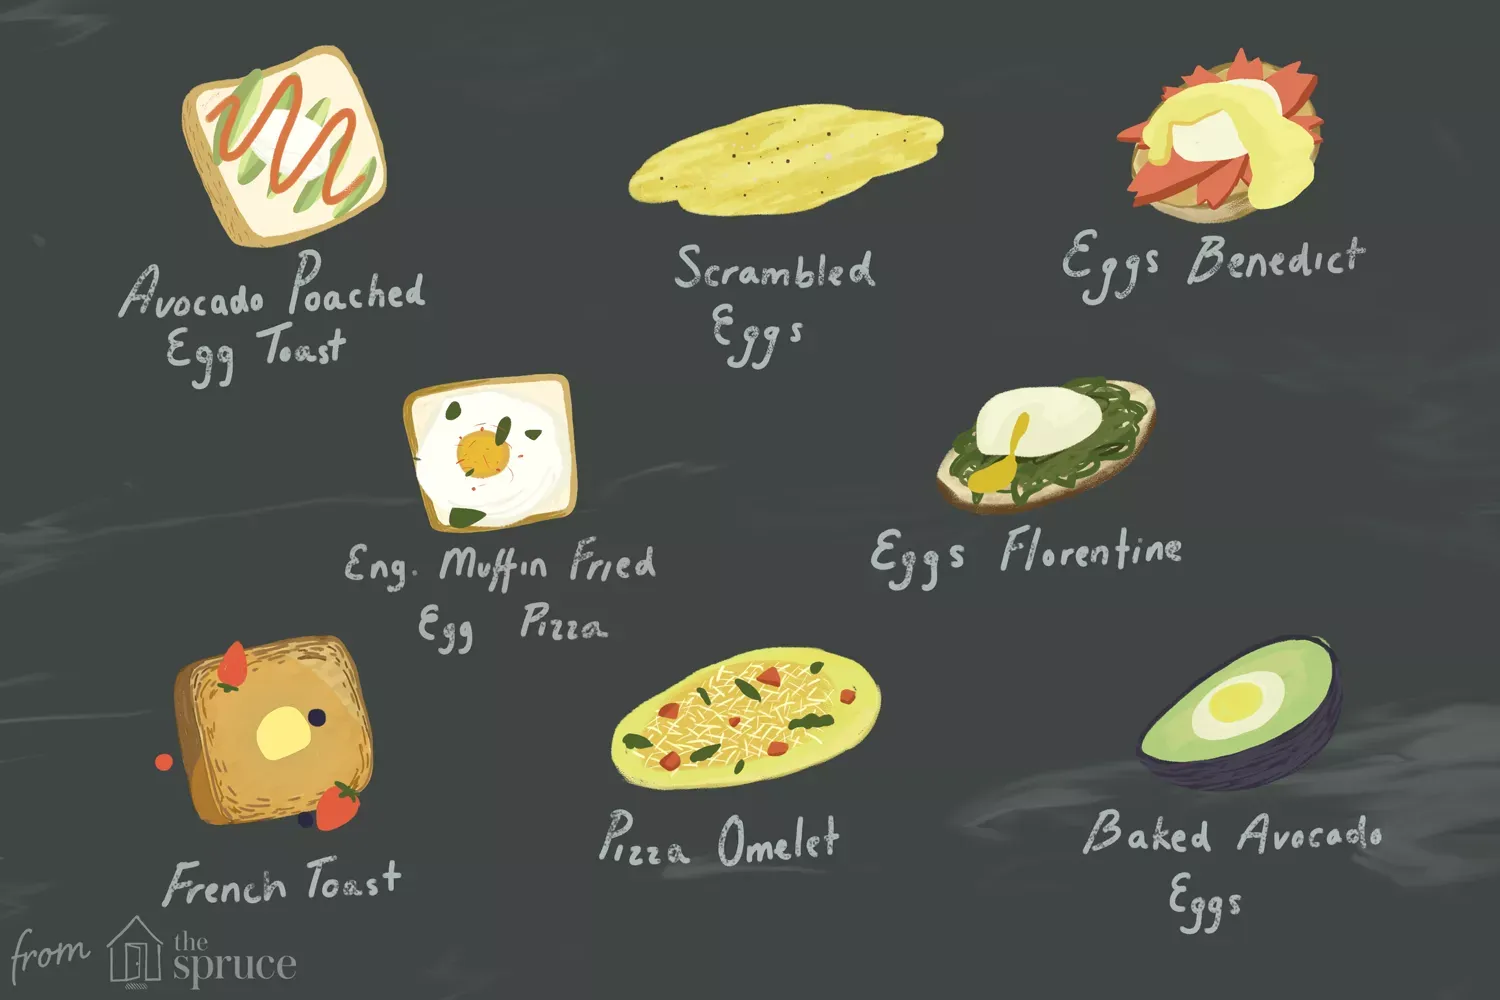 illustration featuring breakfast egg dishes